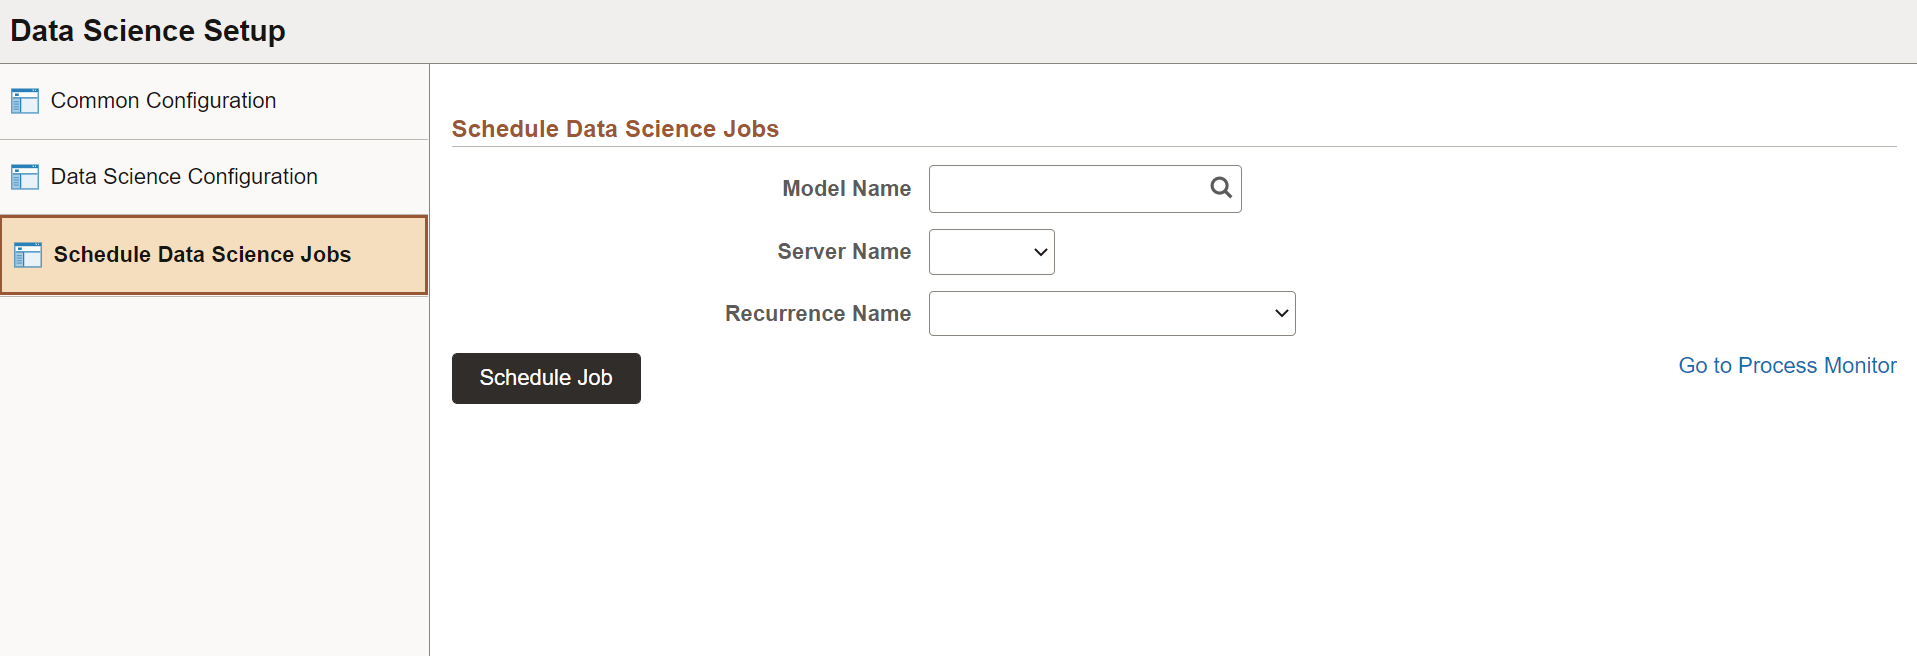 Schedule Data Science Jobs page